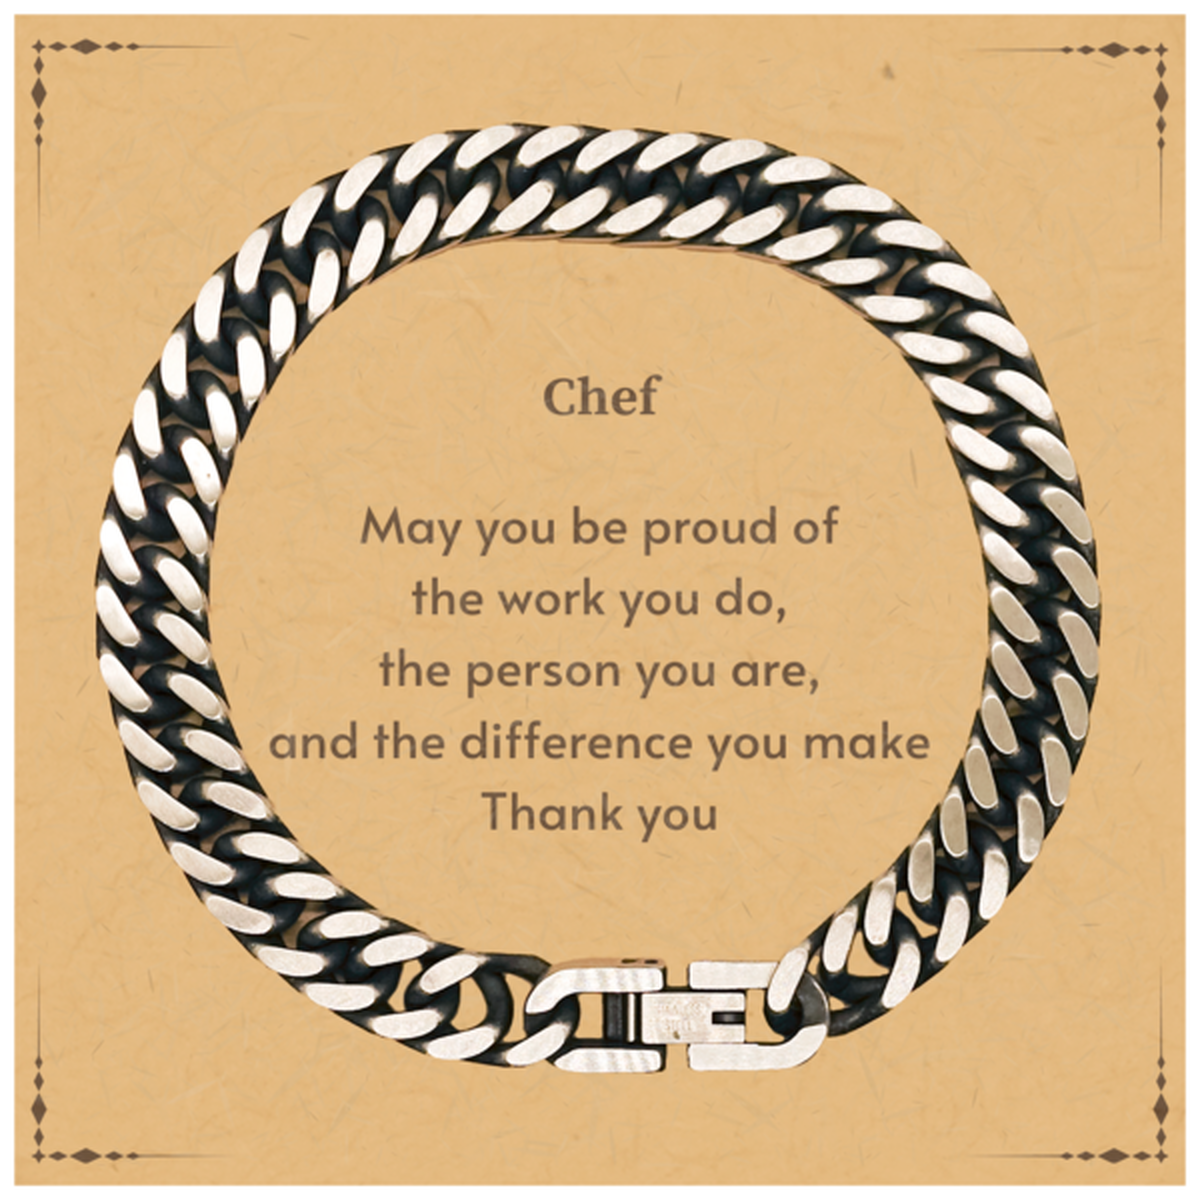 Heartwarming Cuban Link Chain Bracelet Retirement Coworkers Gifts for Chef, Chef May You be proud of the work you do, the person you are Gifts for Boss Men Women Friends